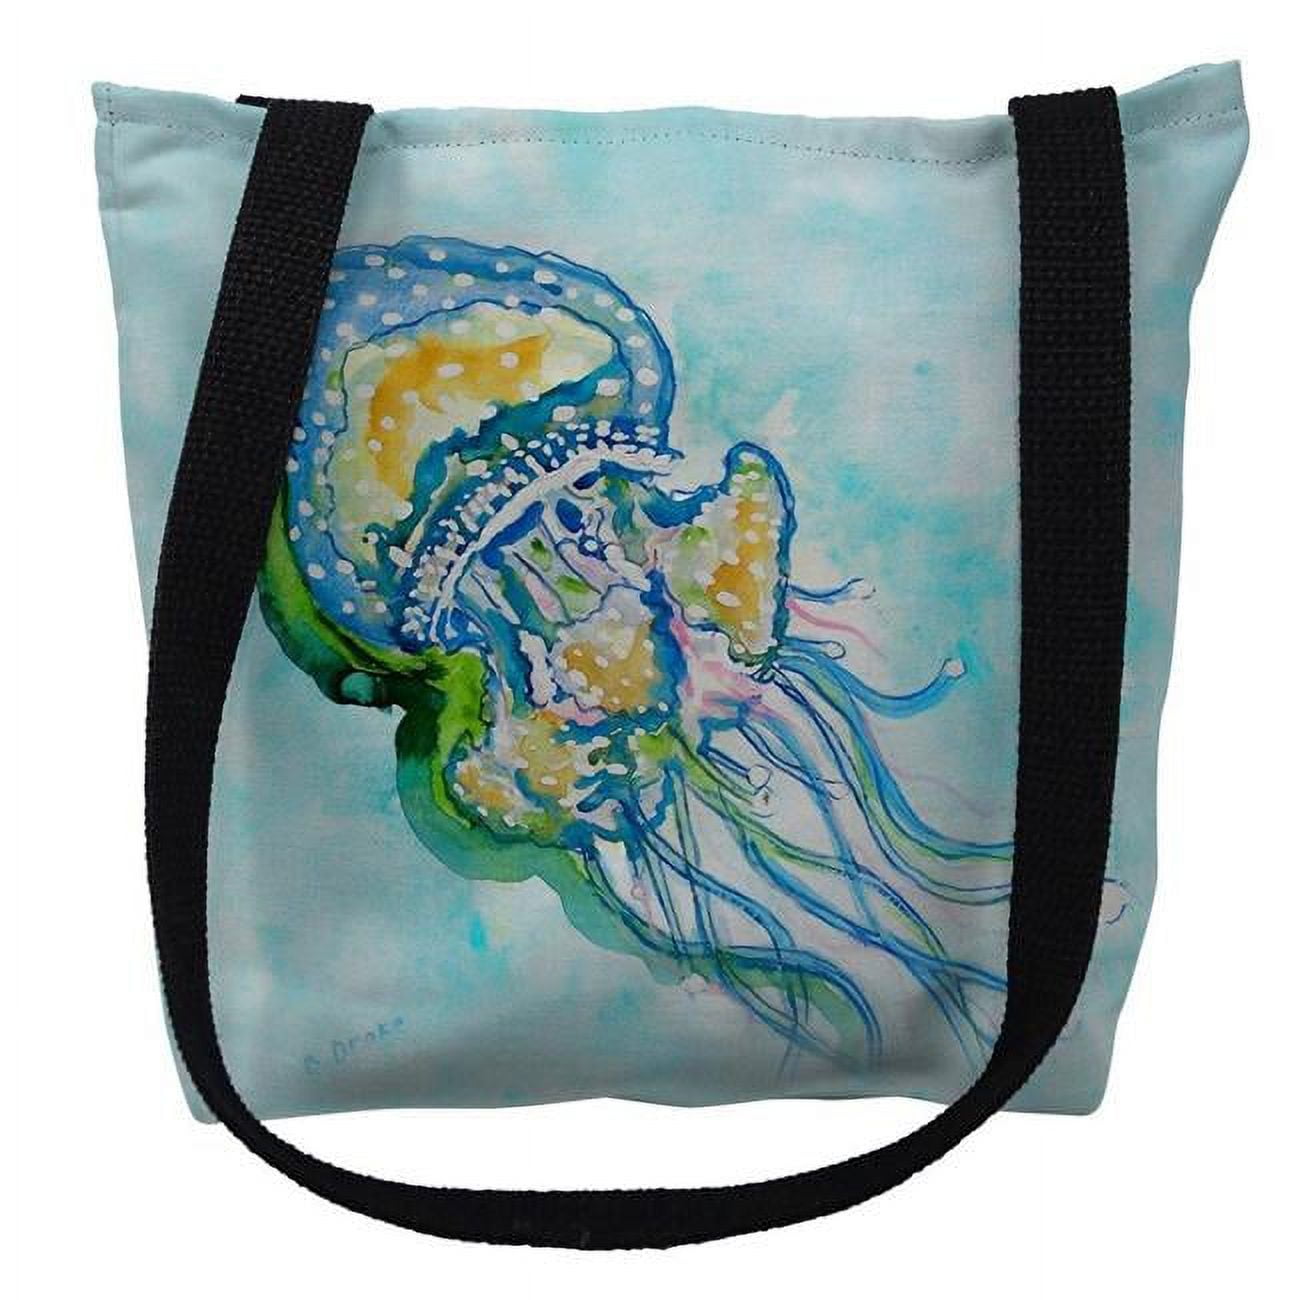 Ty056m 16 X 16 In. Jelly Fish Tote Bag - Medium